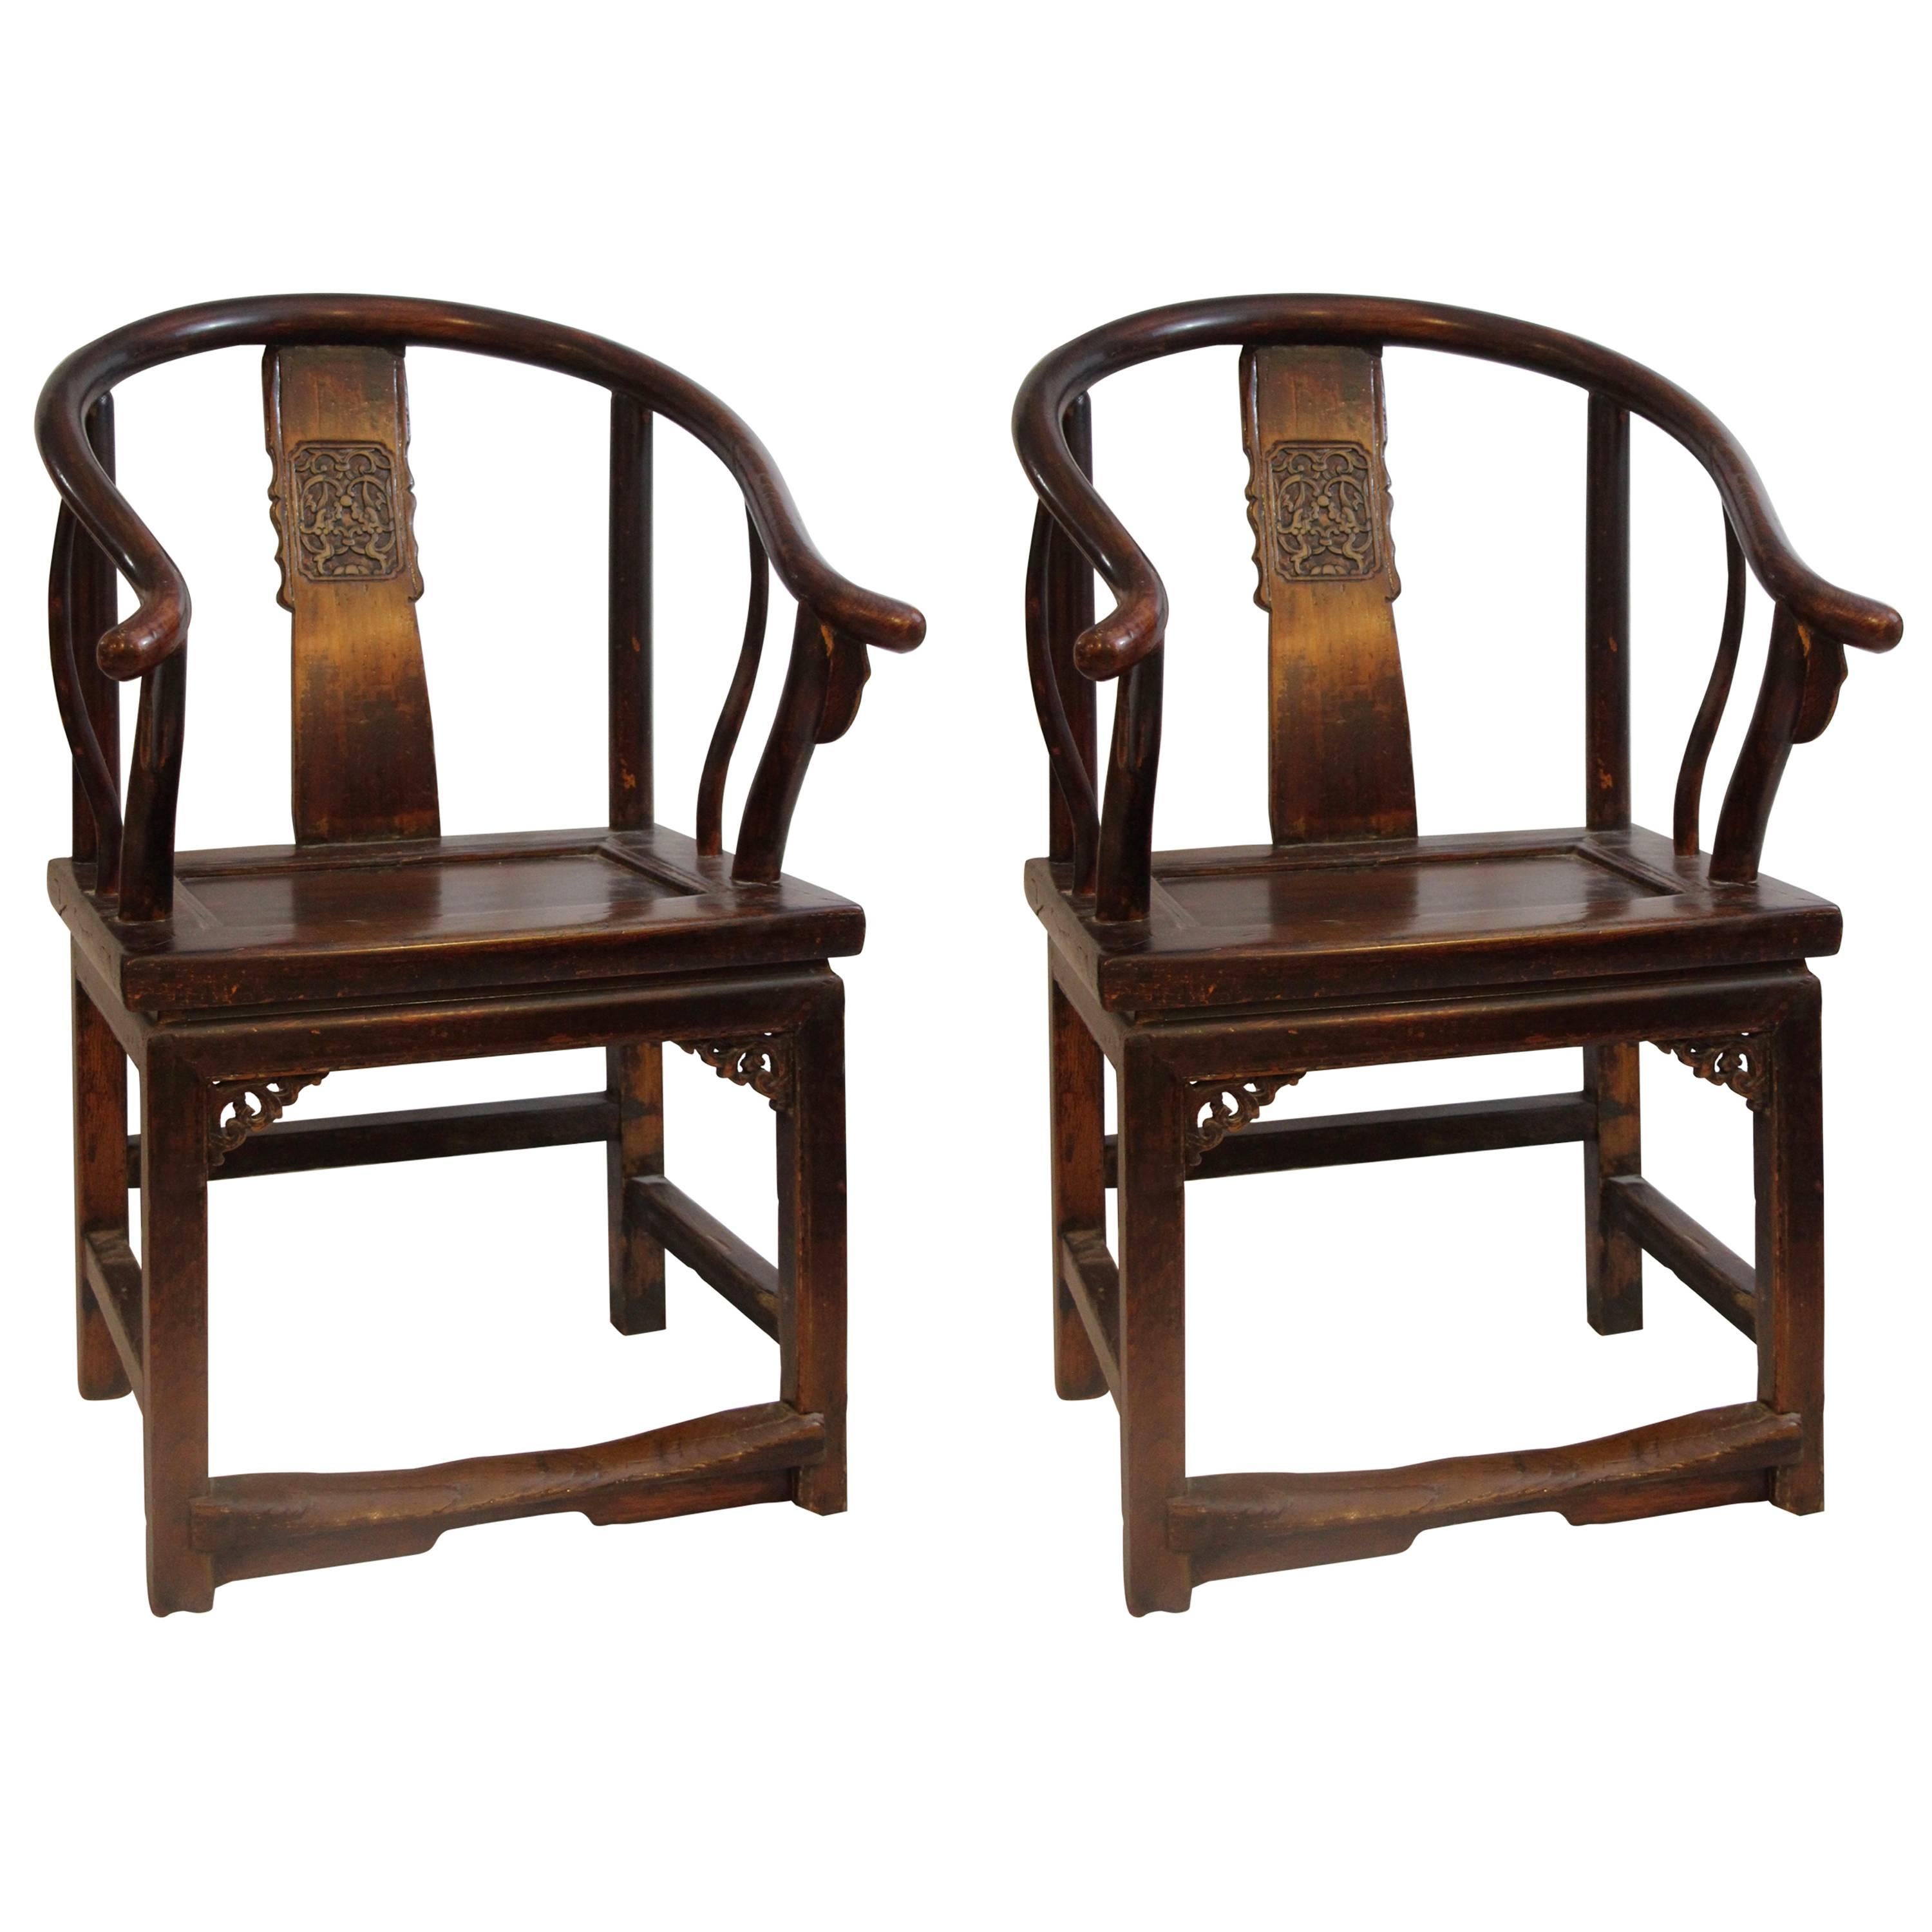 Pair of Horse Shoe Back Armchairs, China, circa 1900